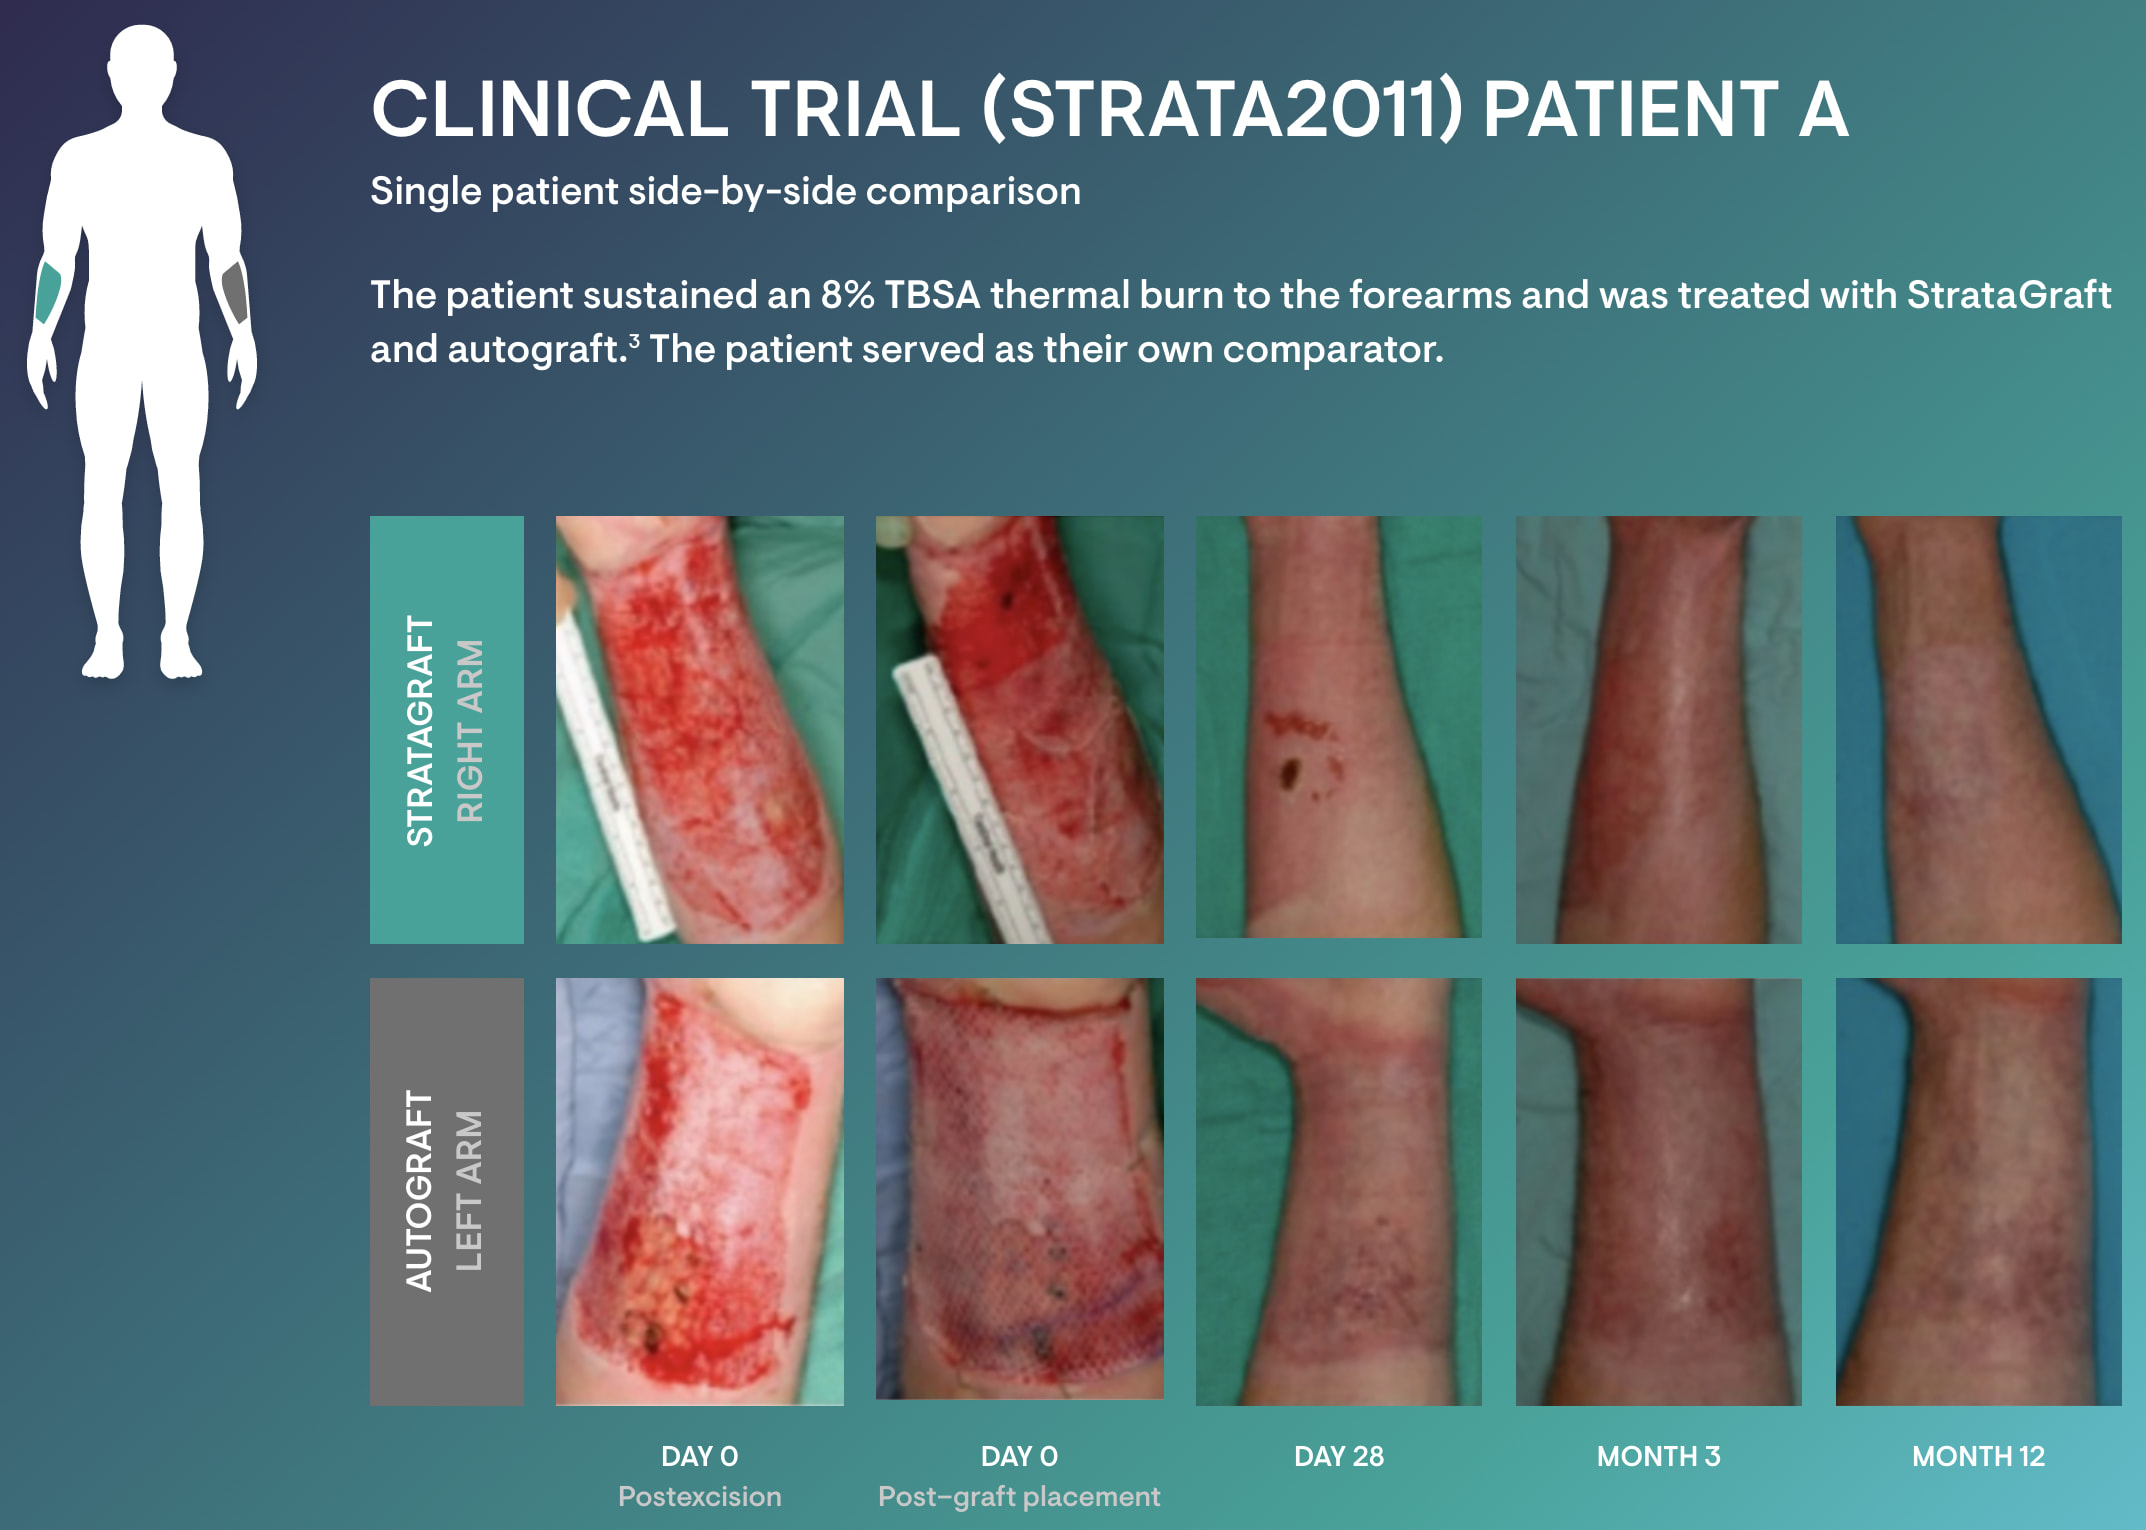 stratagraft cosmesis 01 - StrataGraft: Artificial Skin for Treatment of Severe Thermal Burns